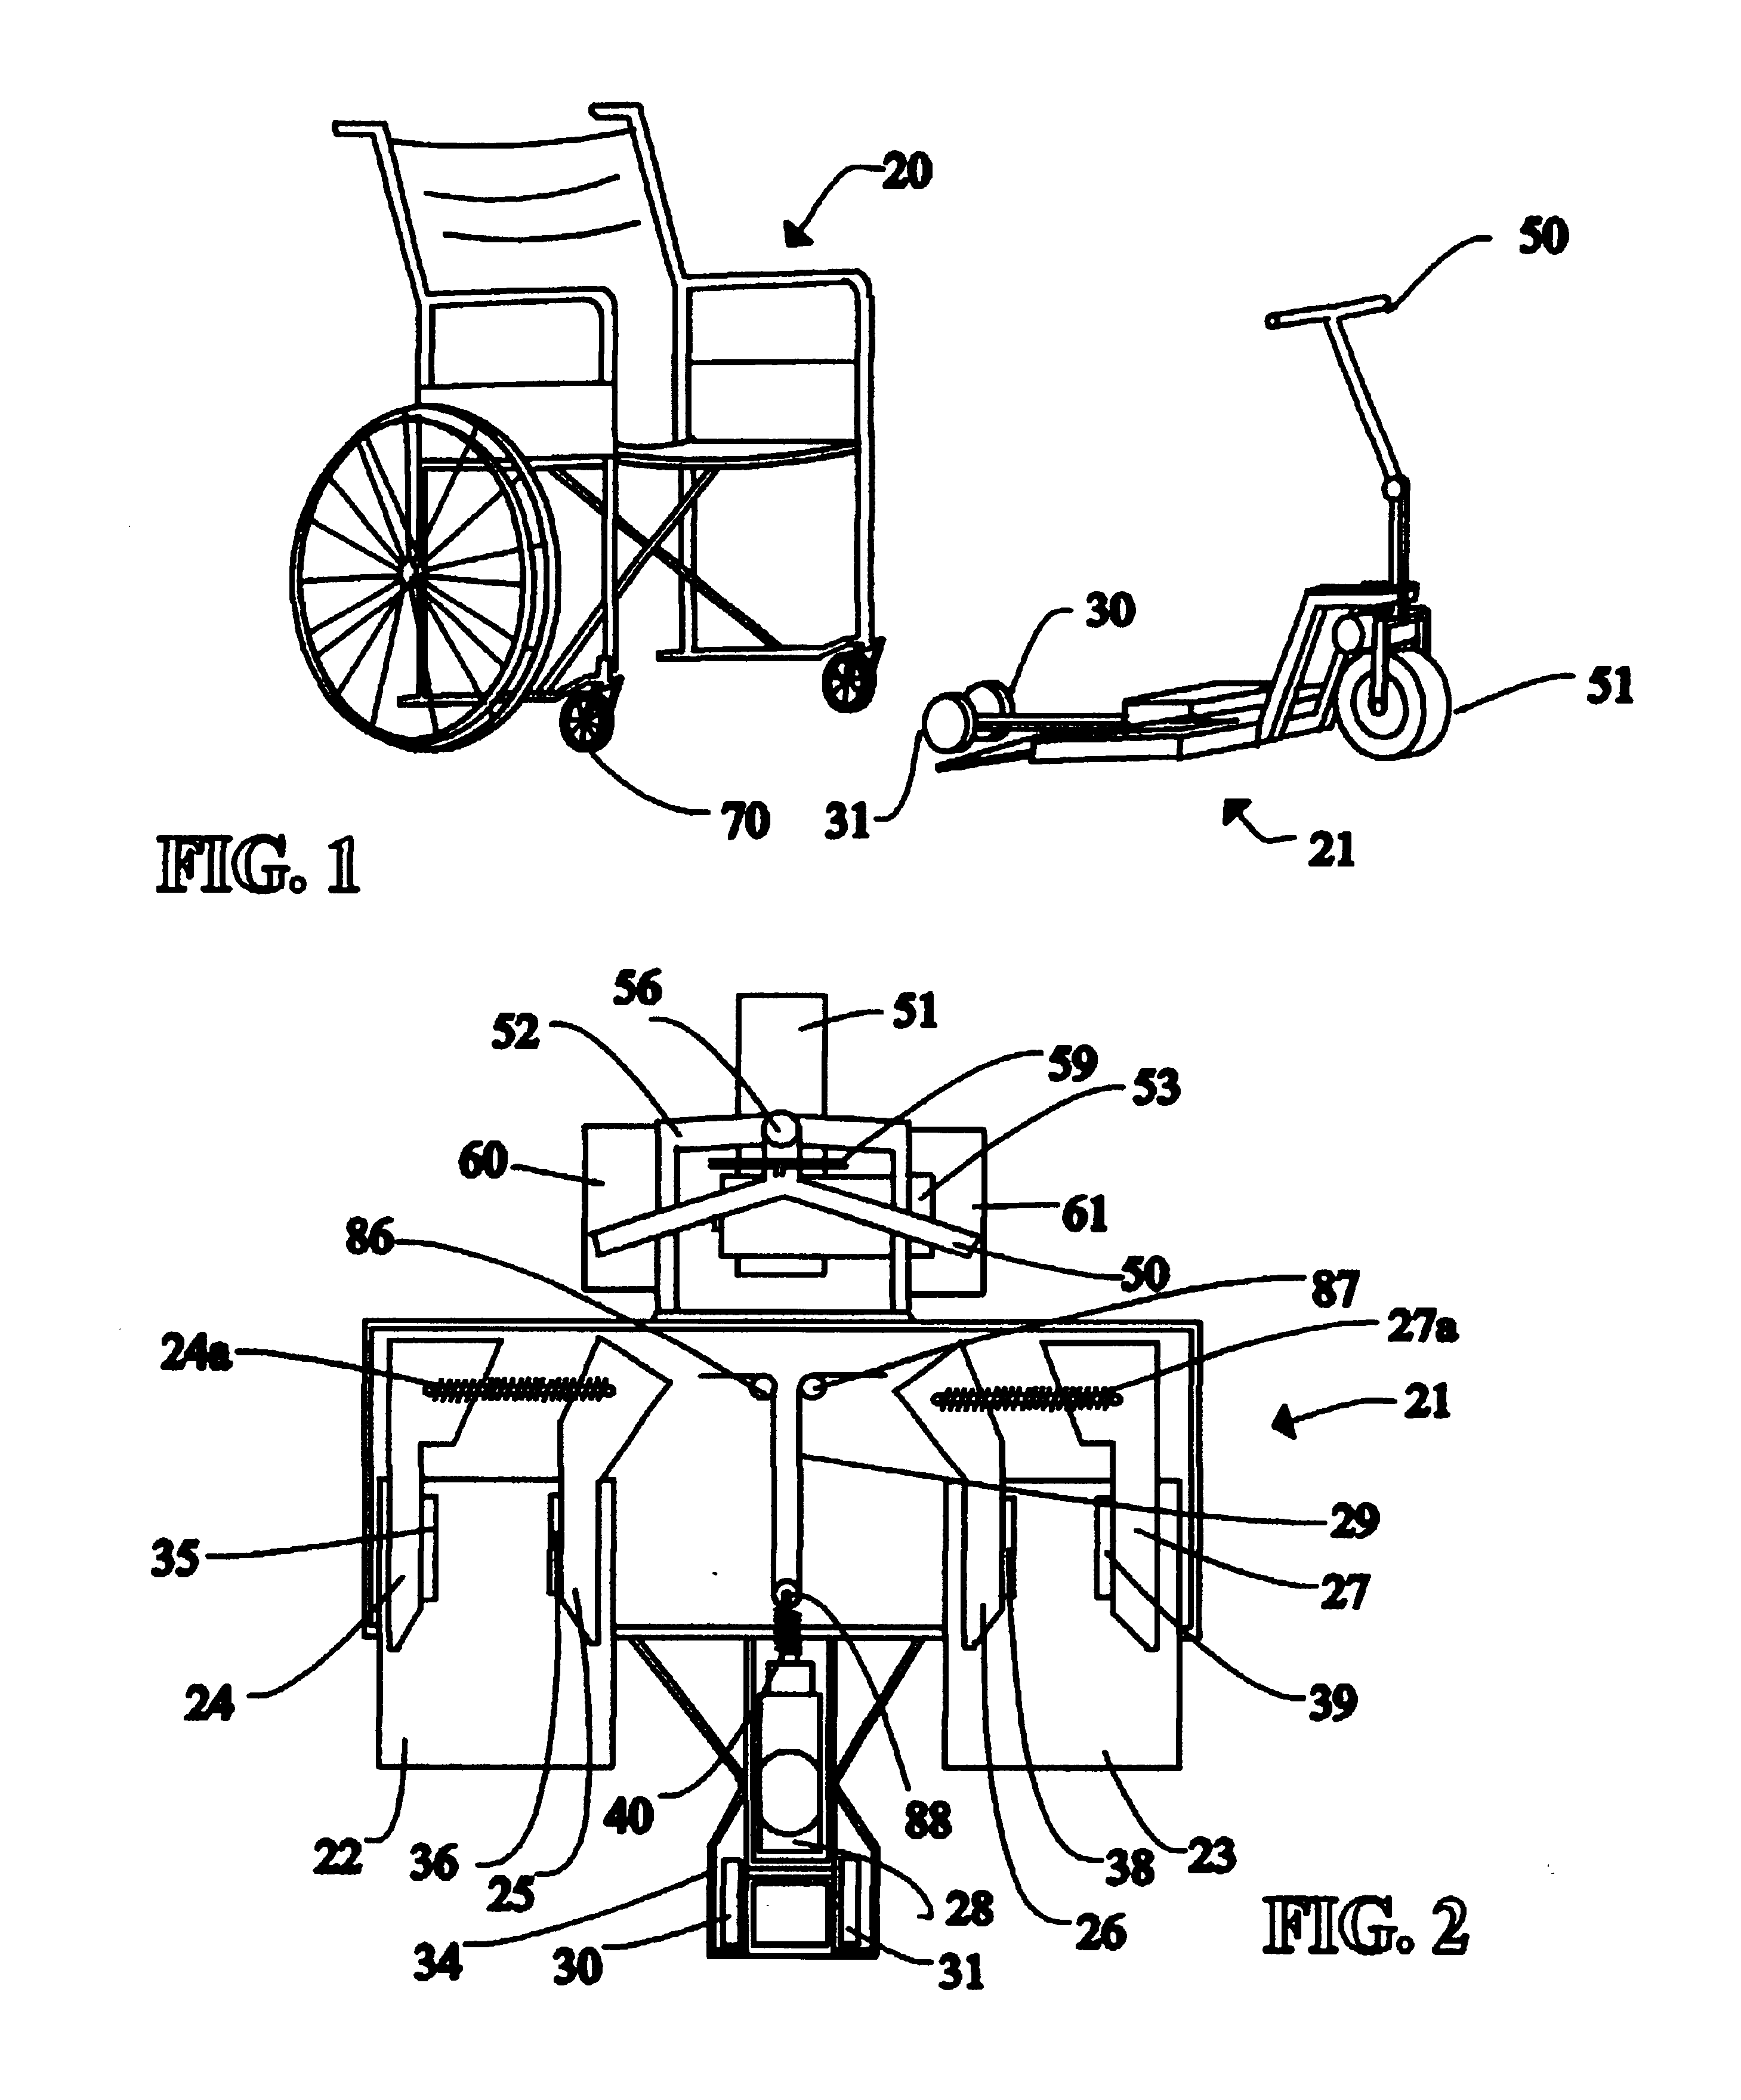 Attachment means for attaching a wheelchair to a motorized apparatus